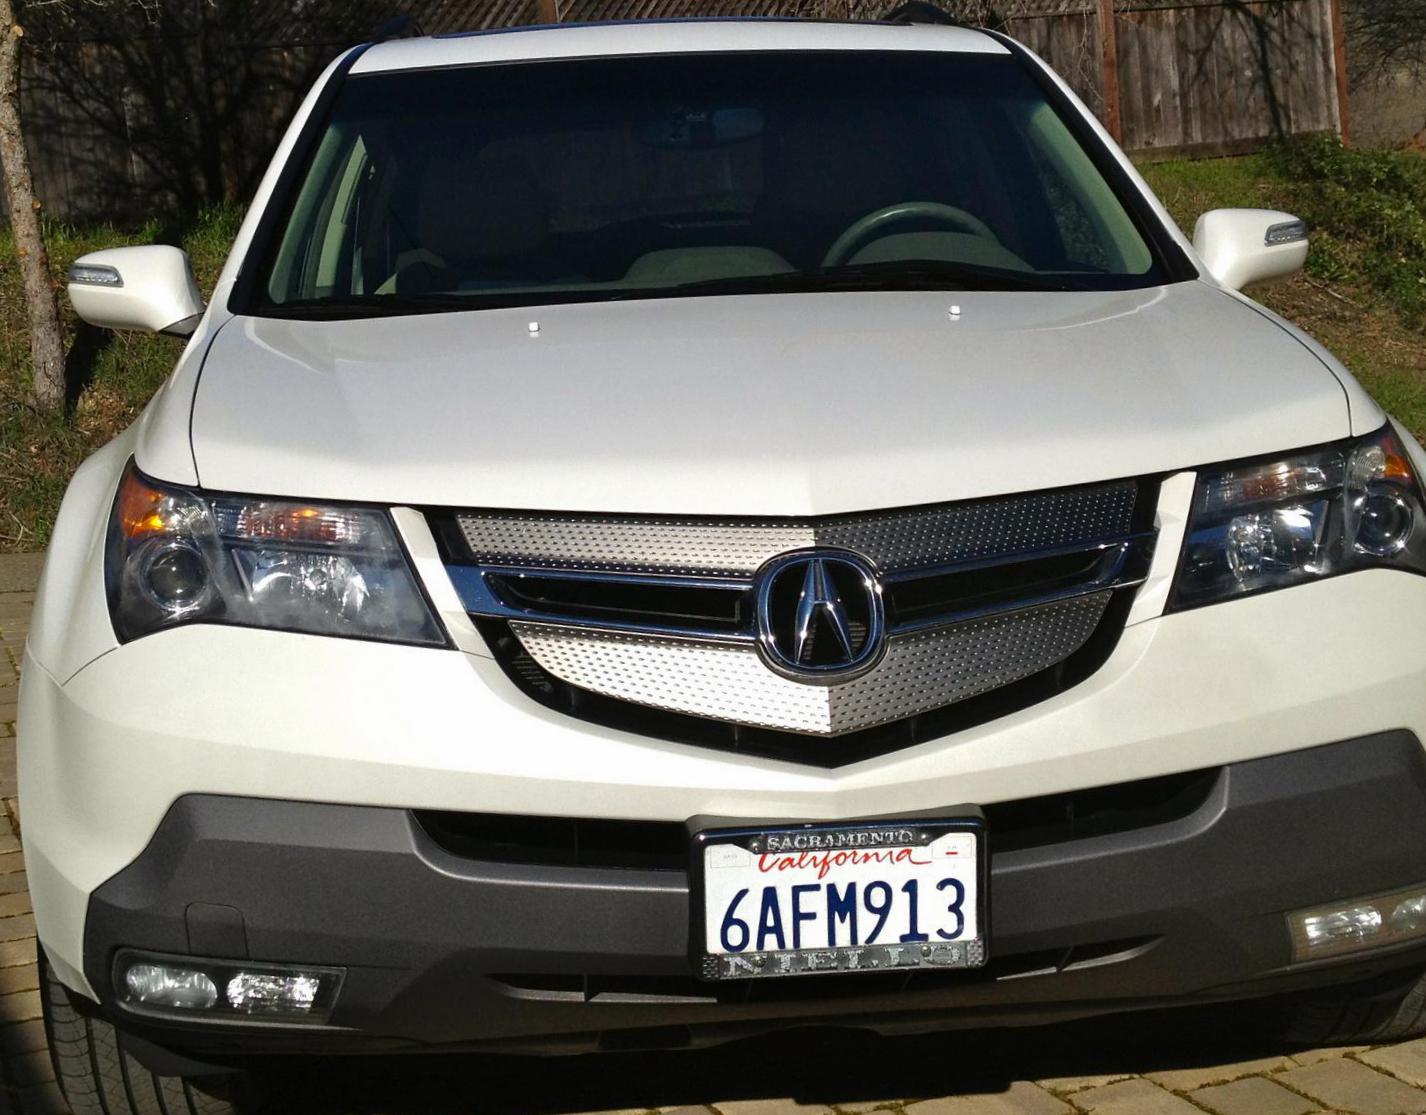 MDX Acura lease 2007